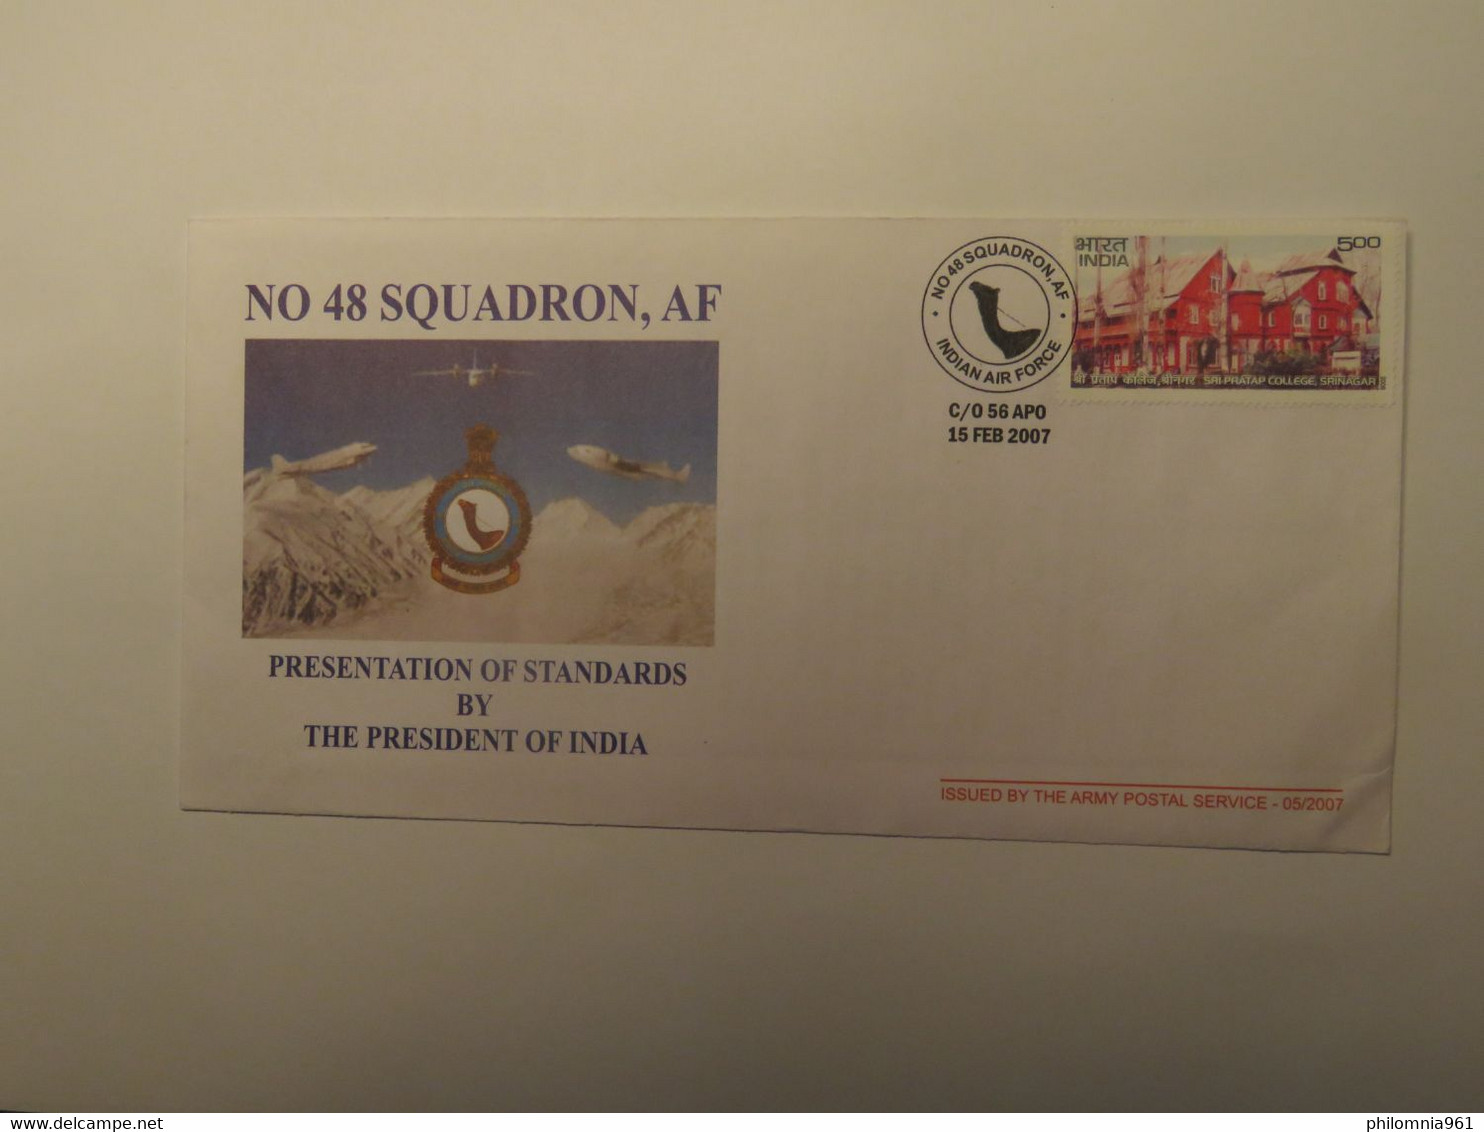 INDIA NO 48 SQUADRON, AF INDIAN AIR FORCE COVER 2007 - Usados